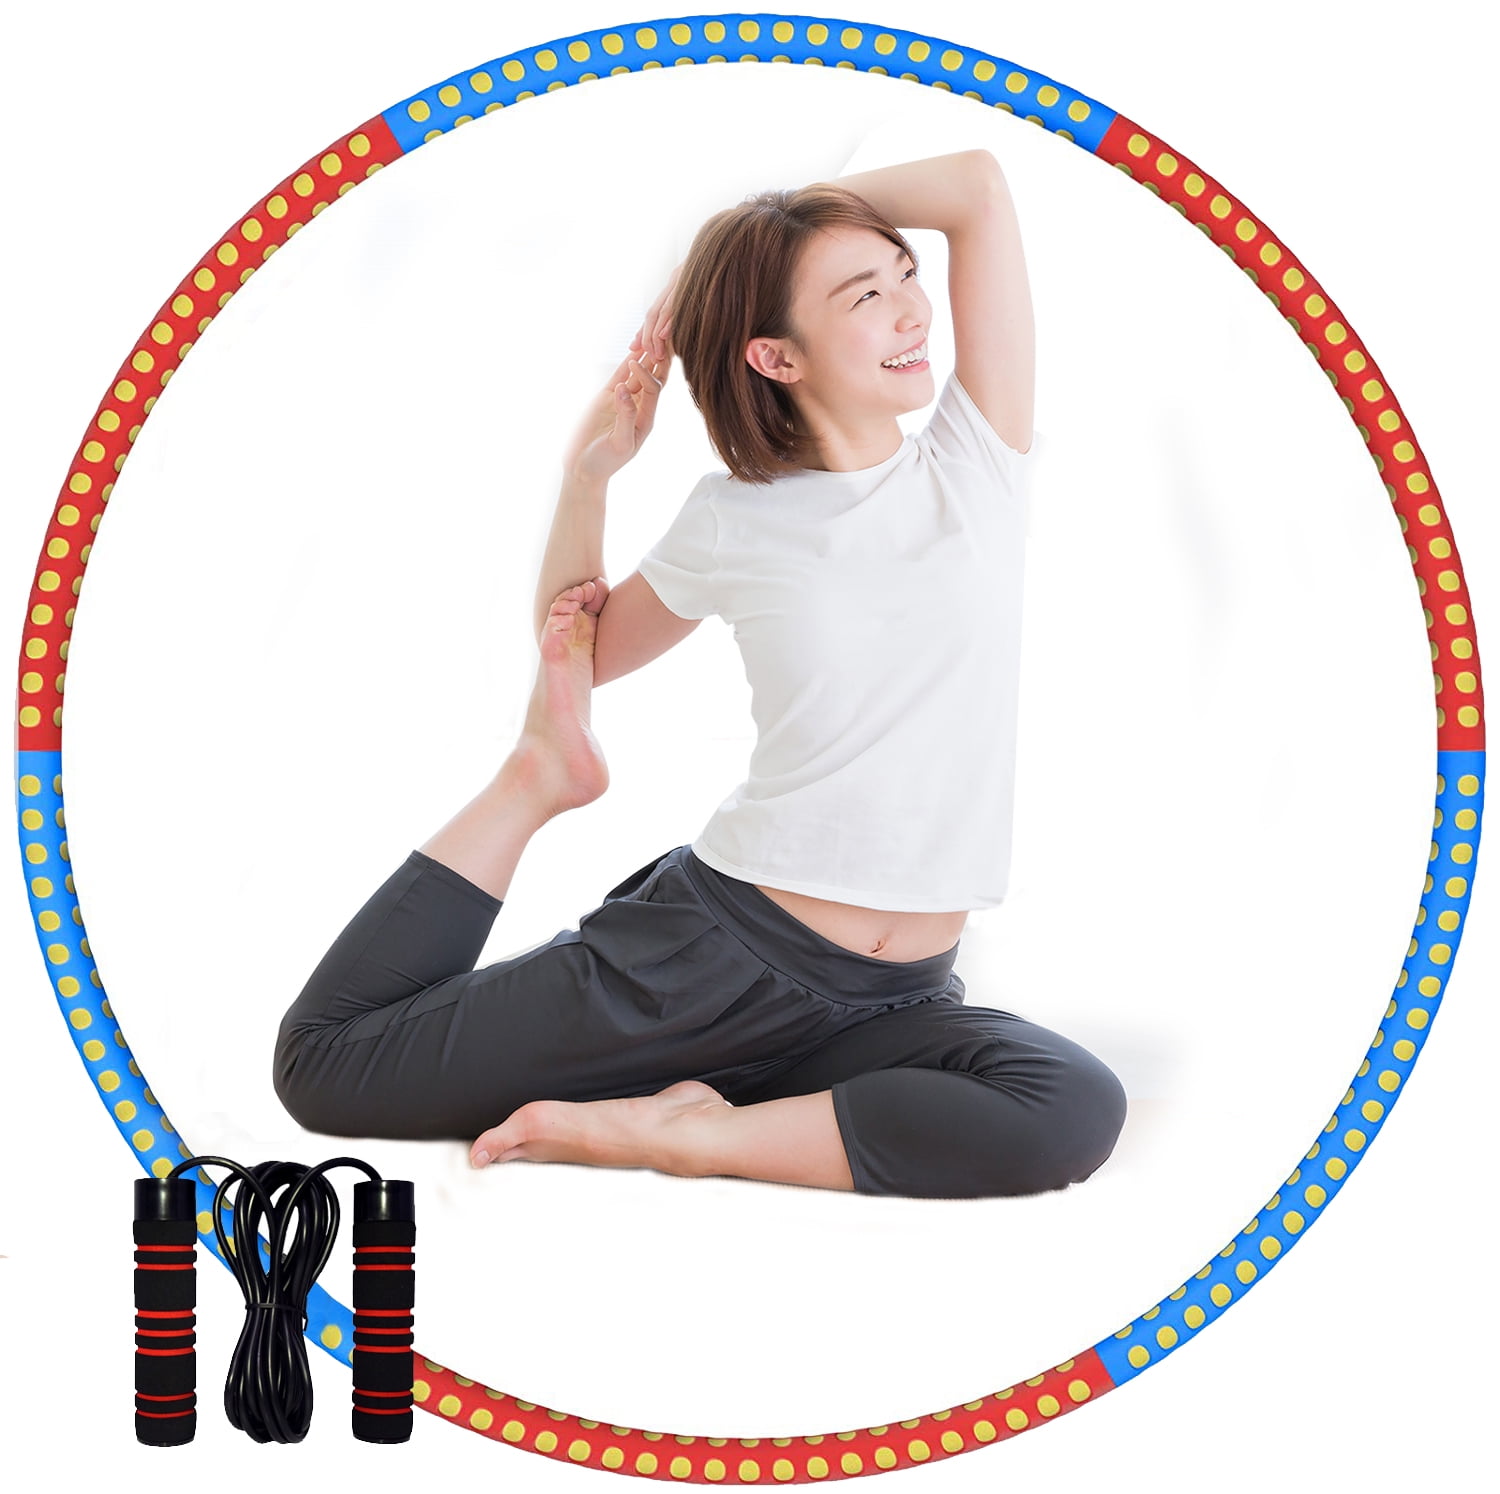 Details about   Fitness Hula Hoop with Jump Rope Exercise Detachable Hoop Removable Six-Section 